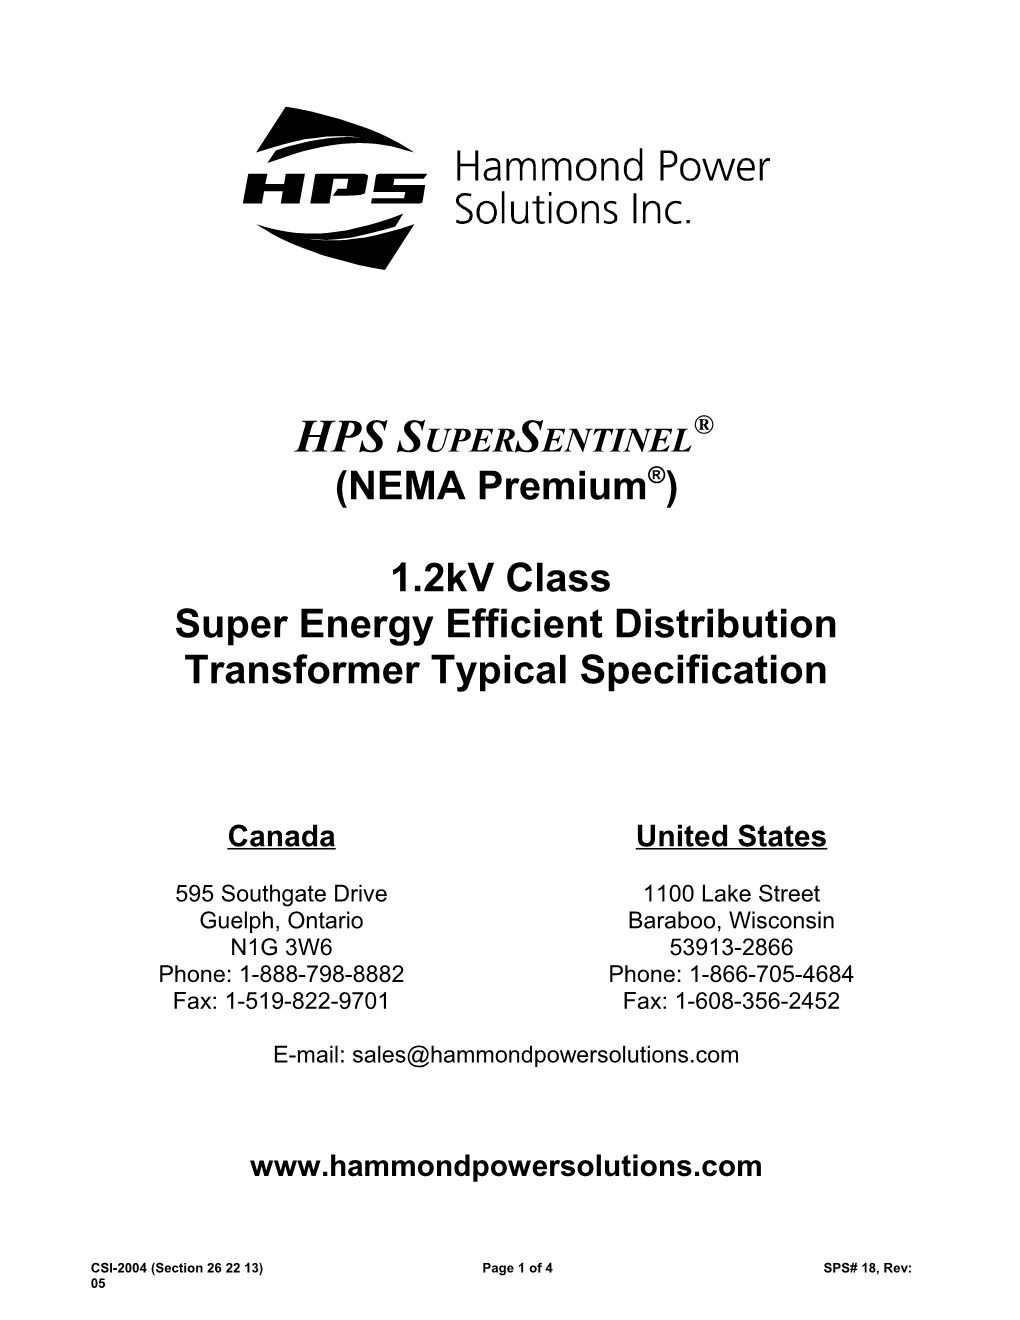 Super Energy Efficient Distribution Transformertypical Specification